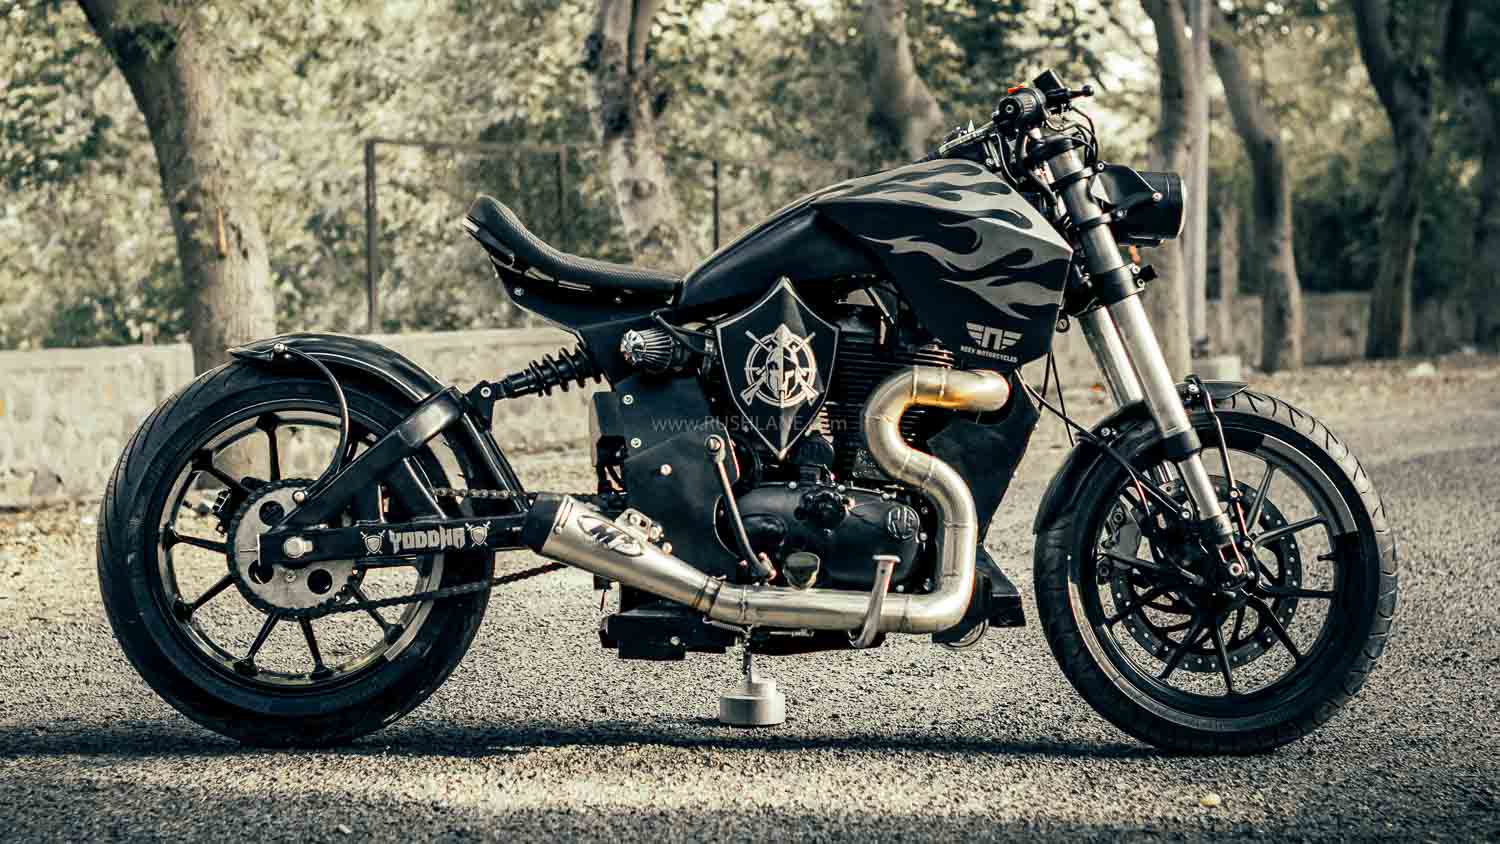 This Custom RE Continental GT 650 From Neev Motorcycles Is A Beast